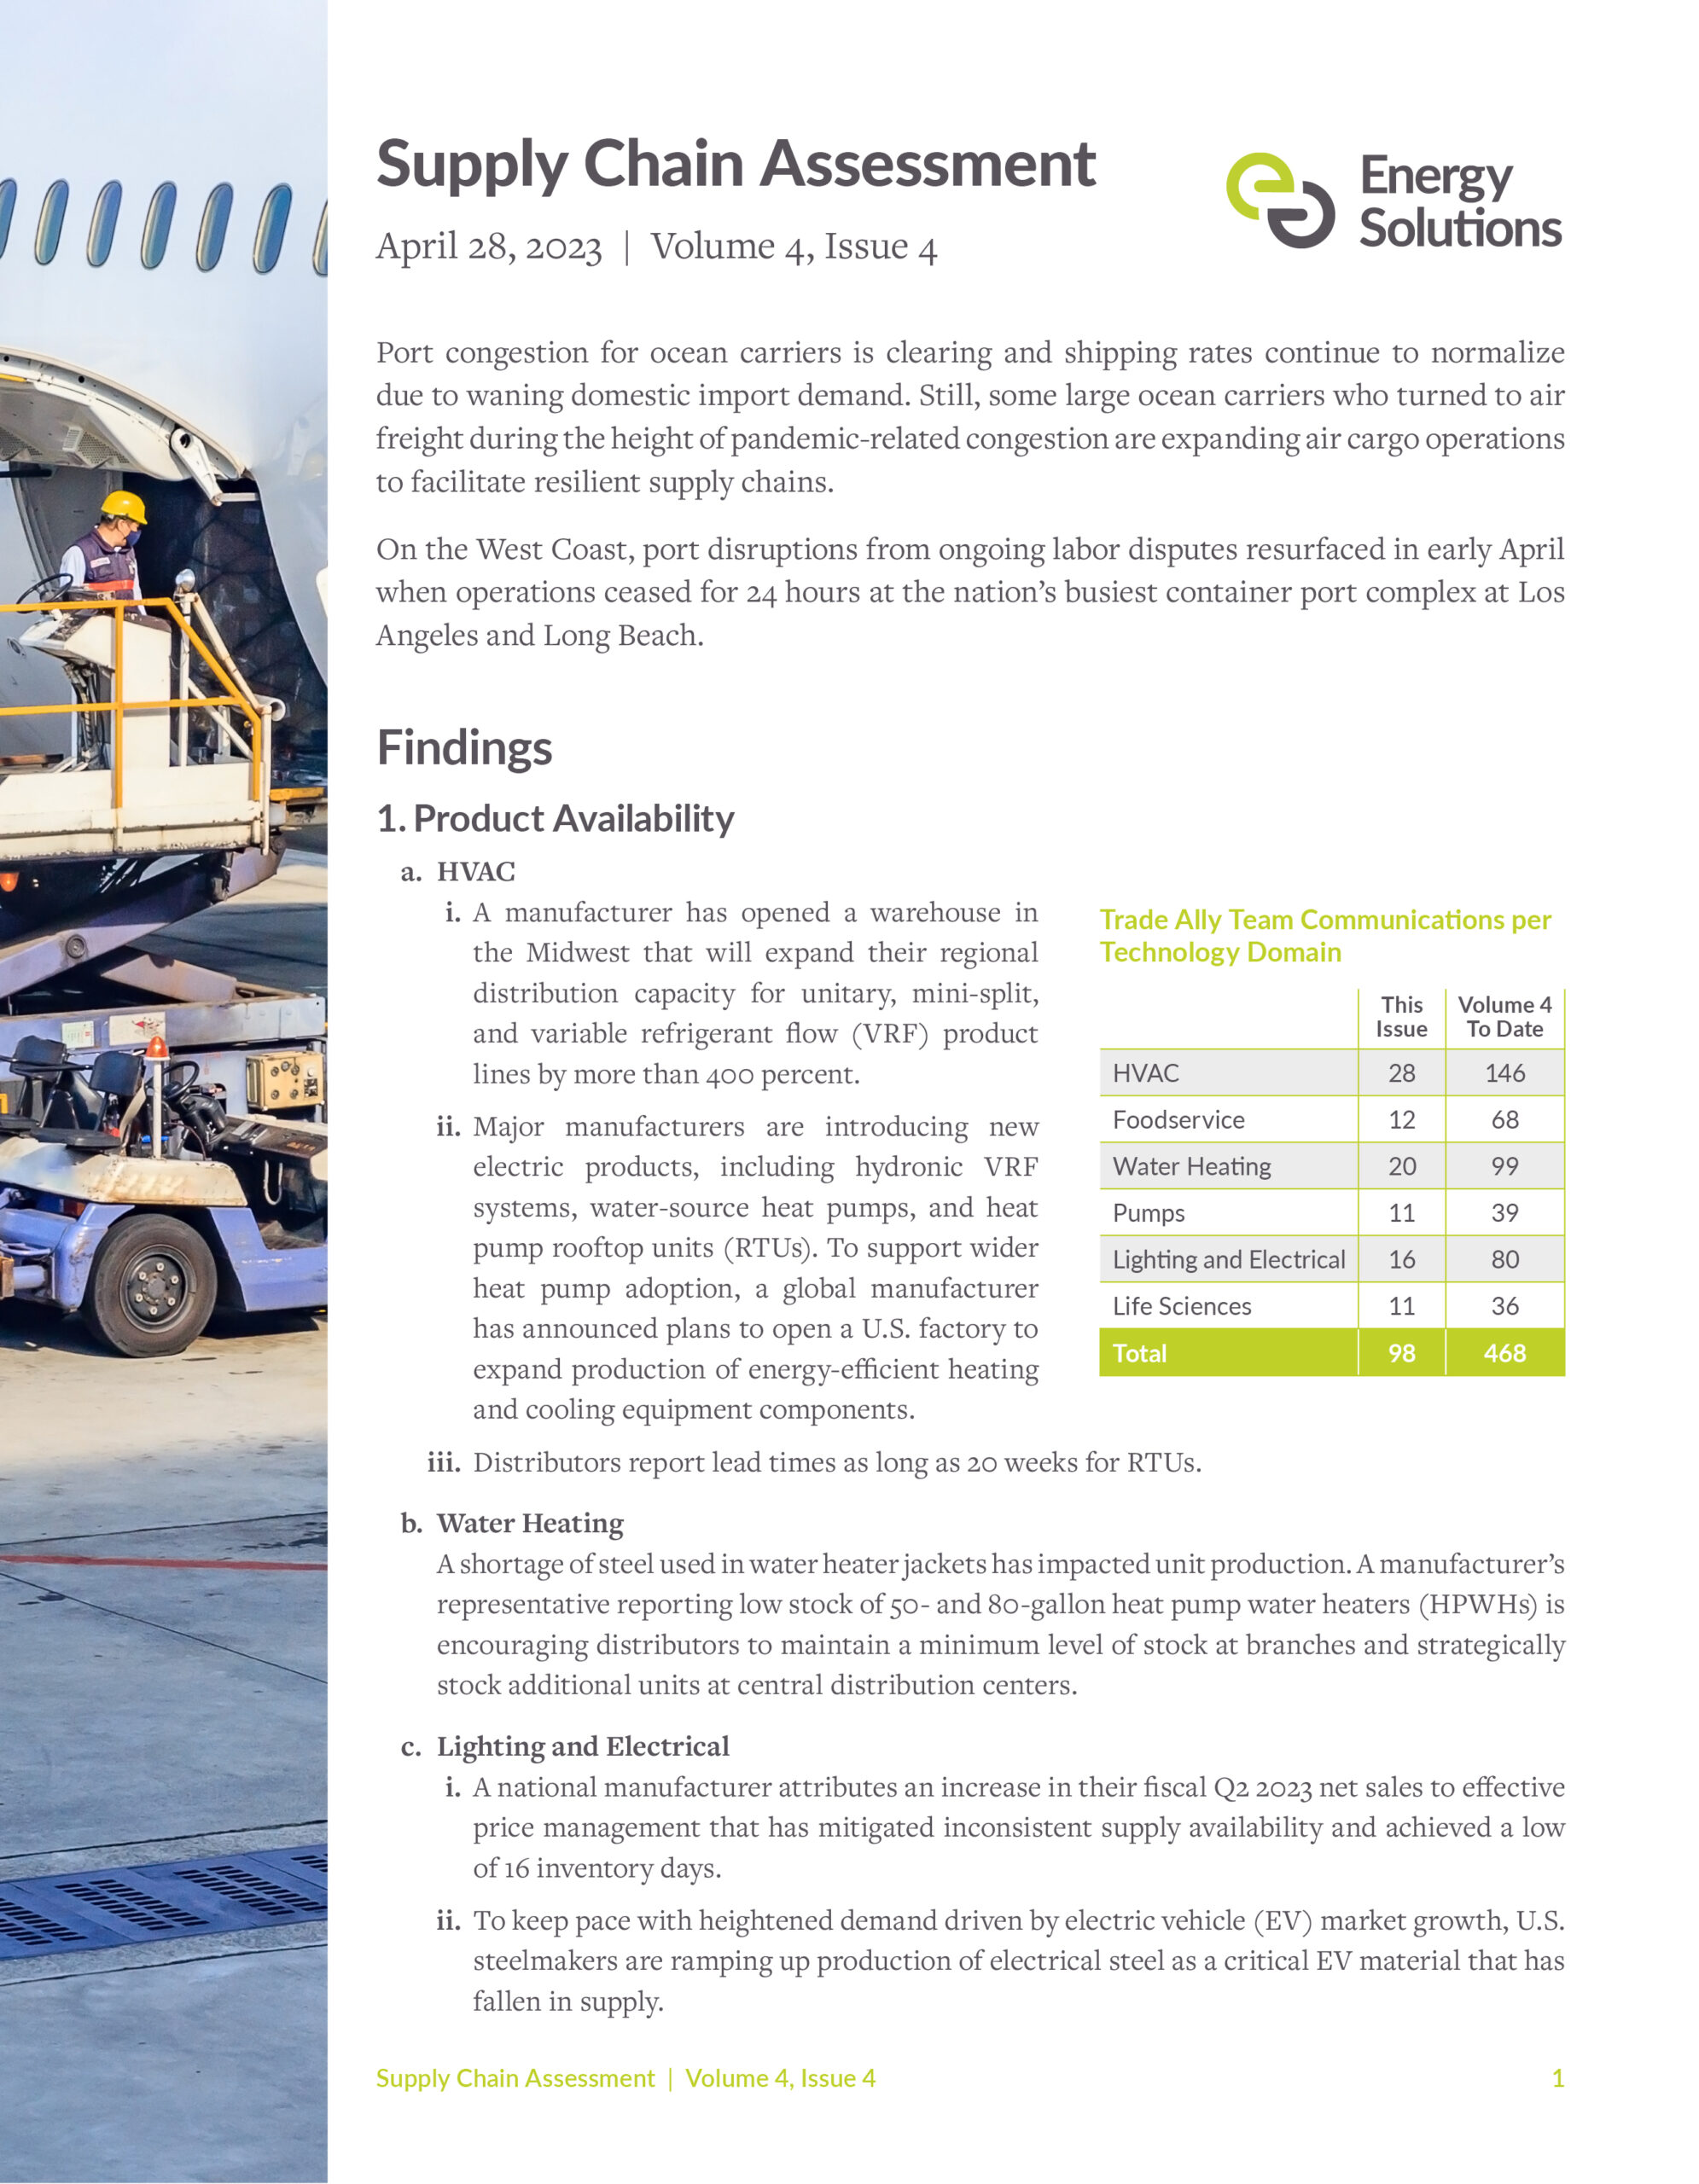 Supply Chain Assessment Volume 4 Issue 4